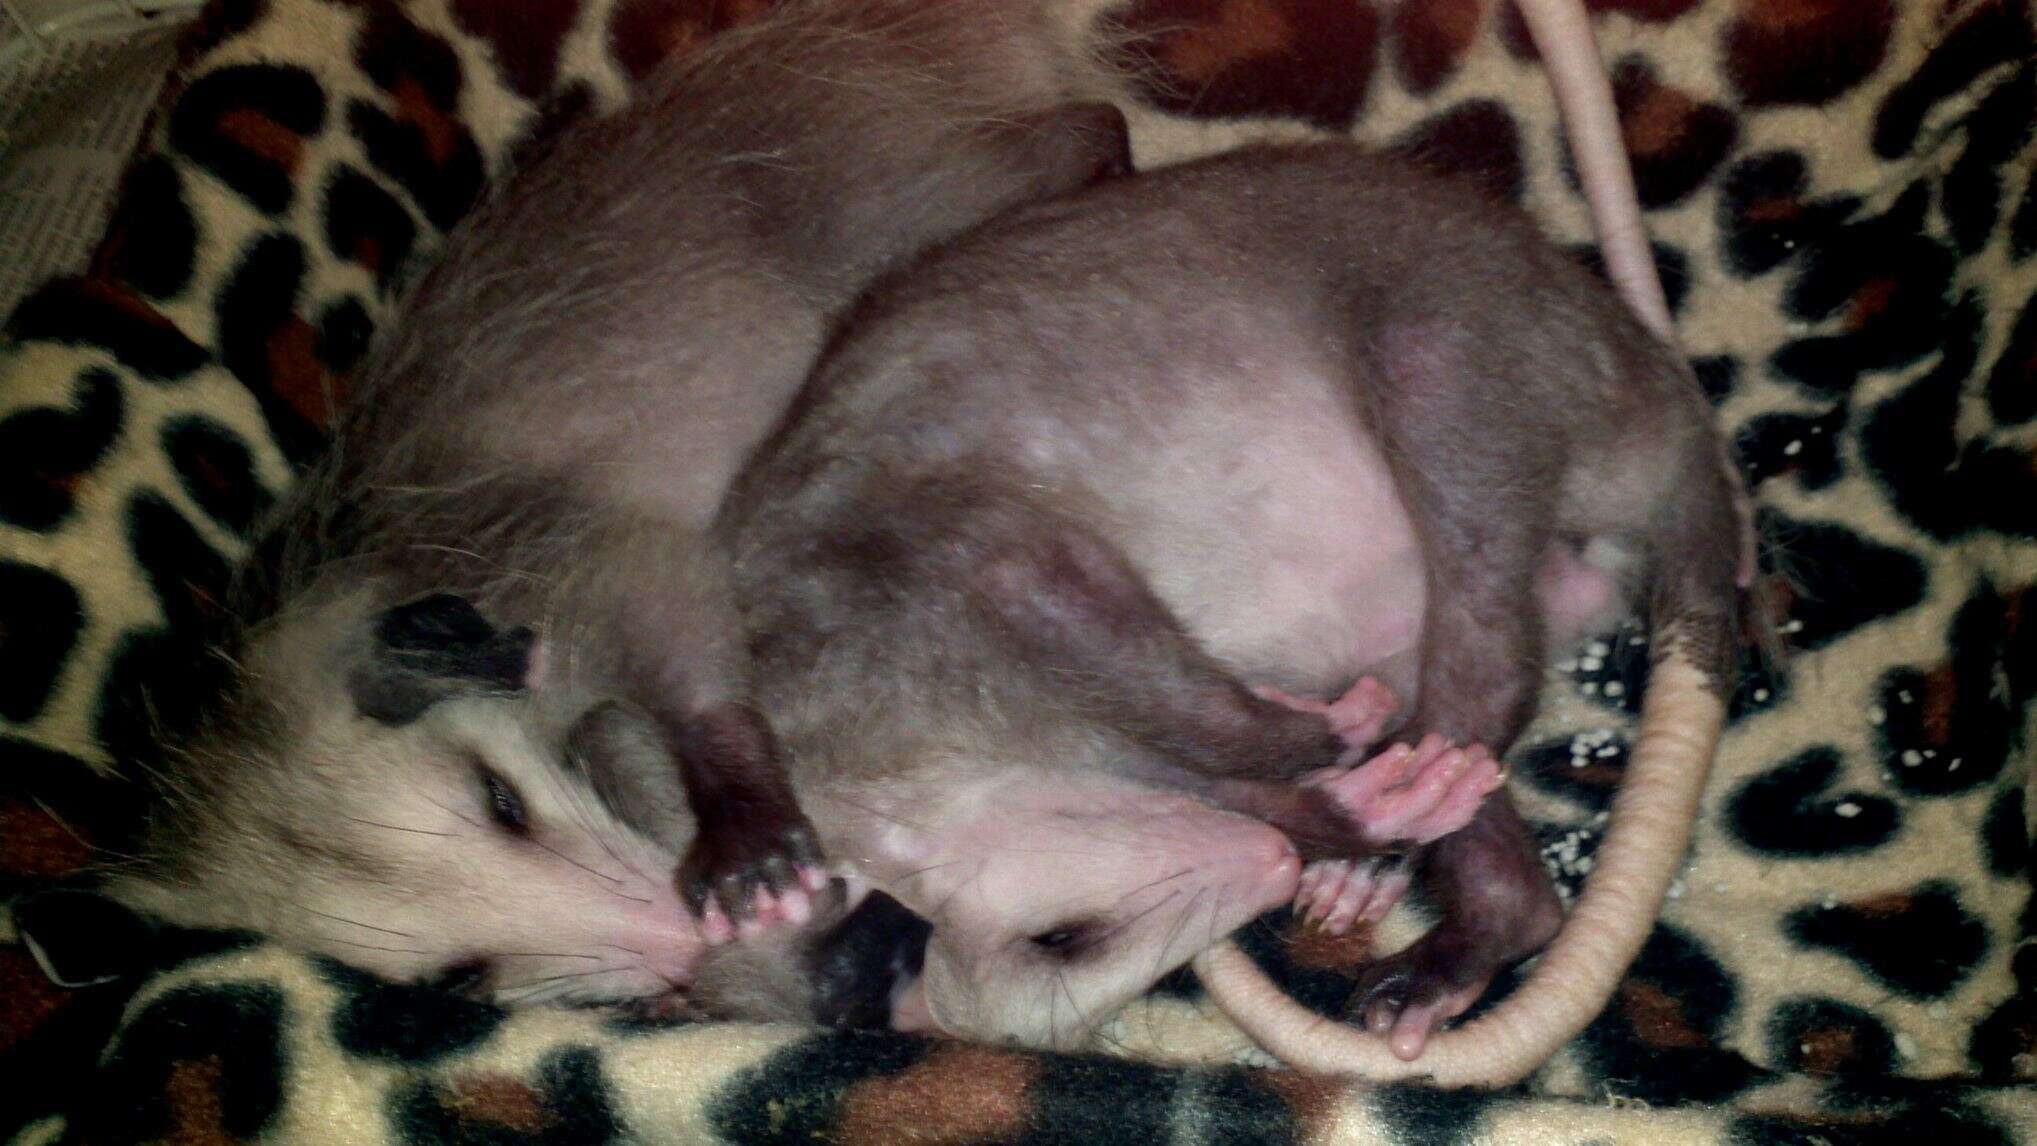 Orphaned possums taken in and rehabilitated